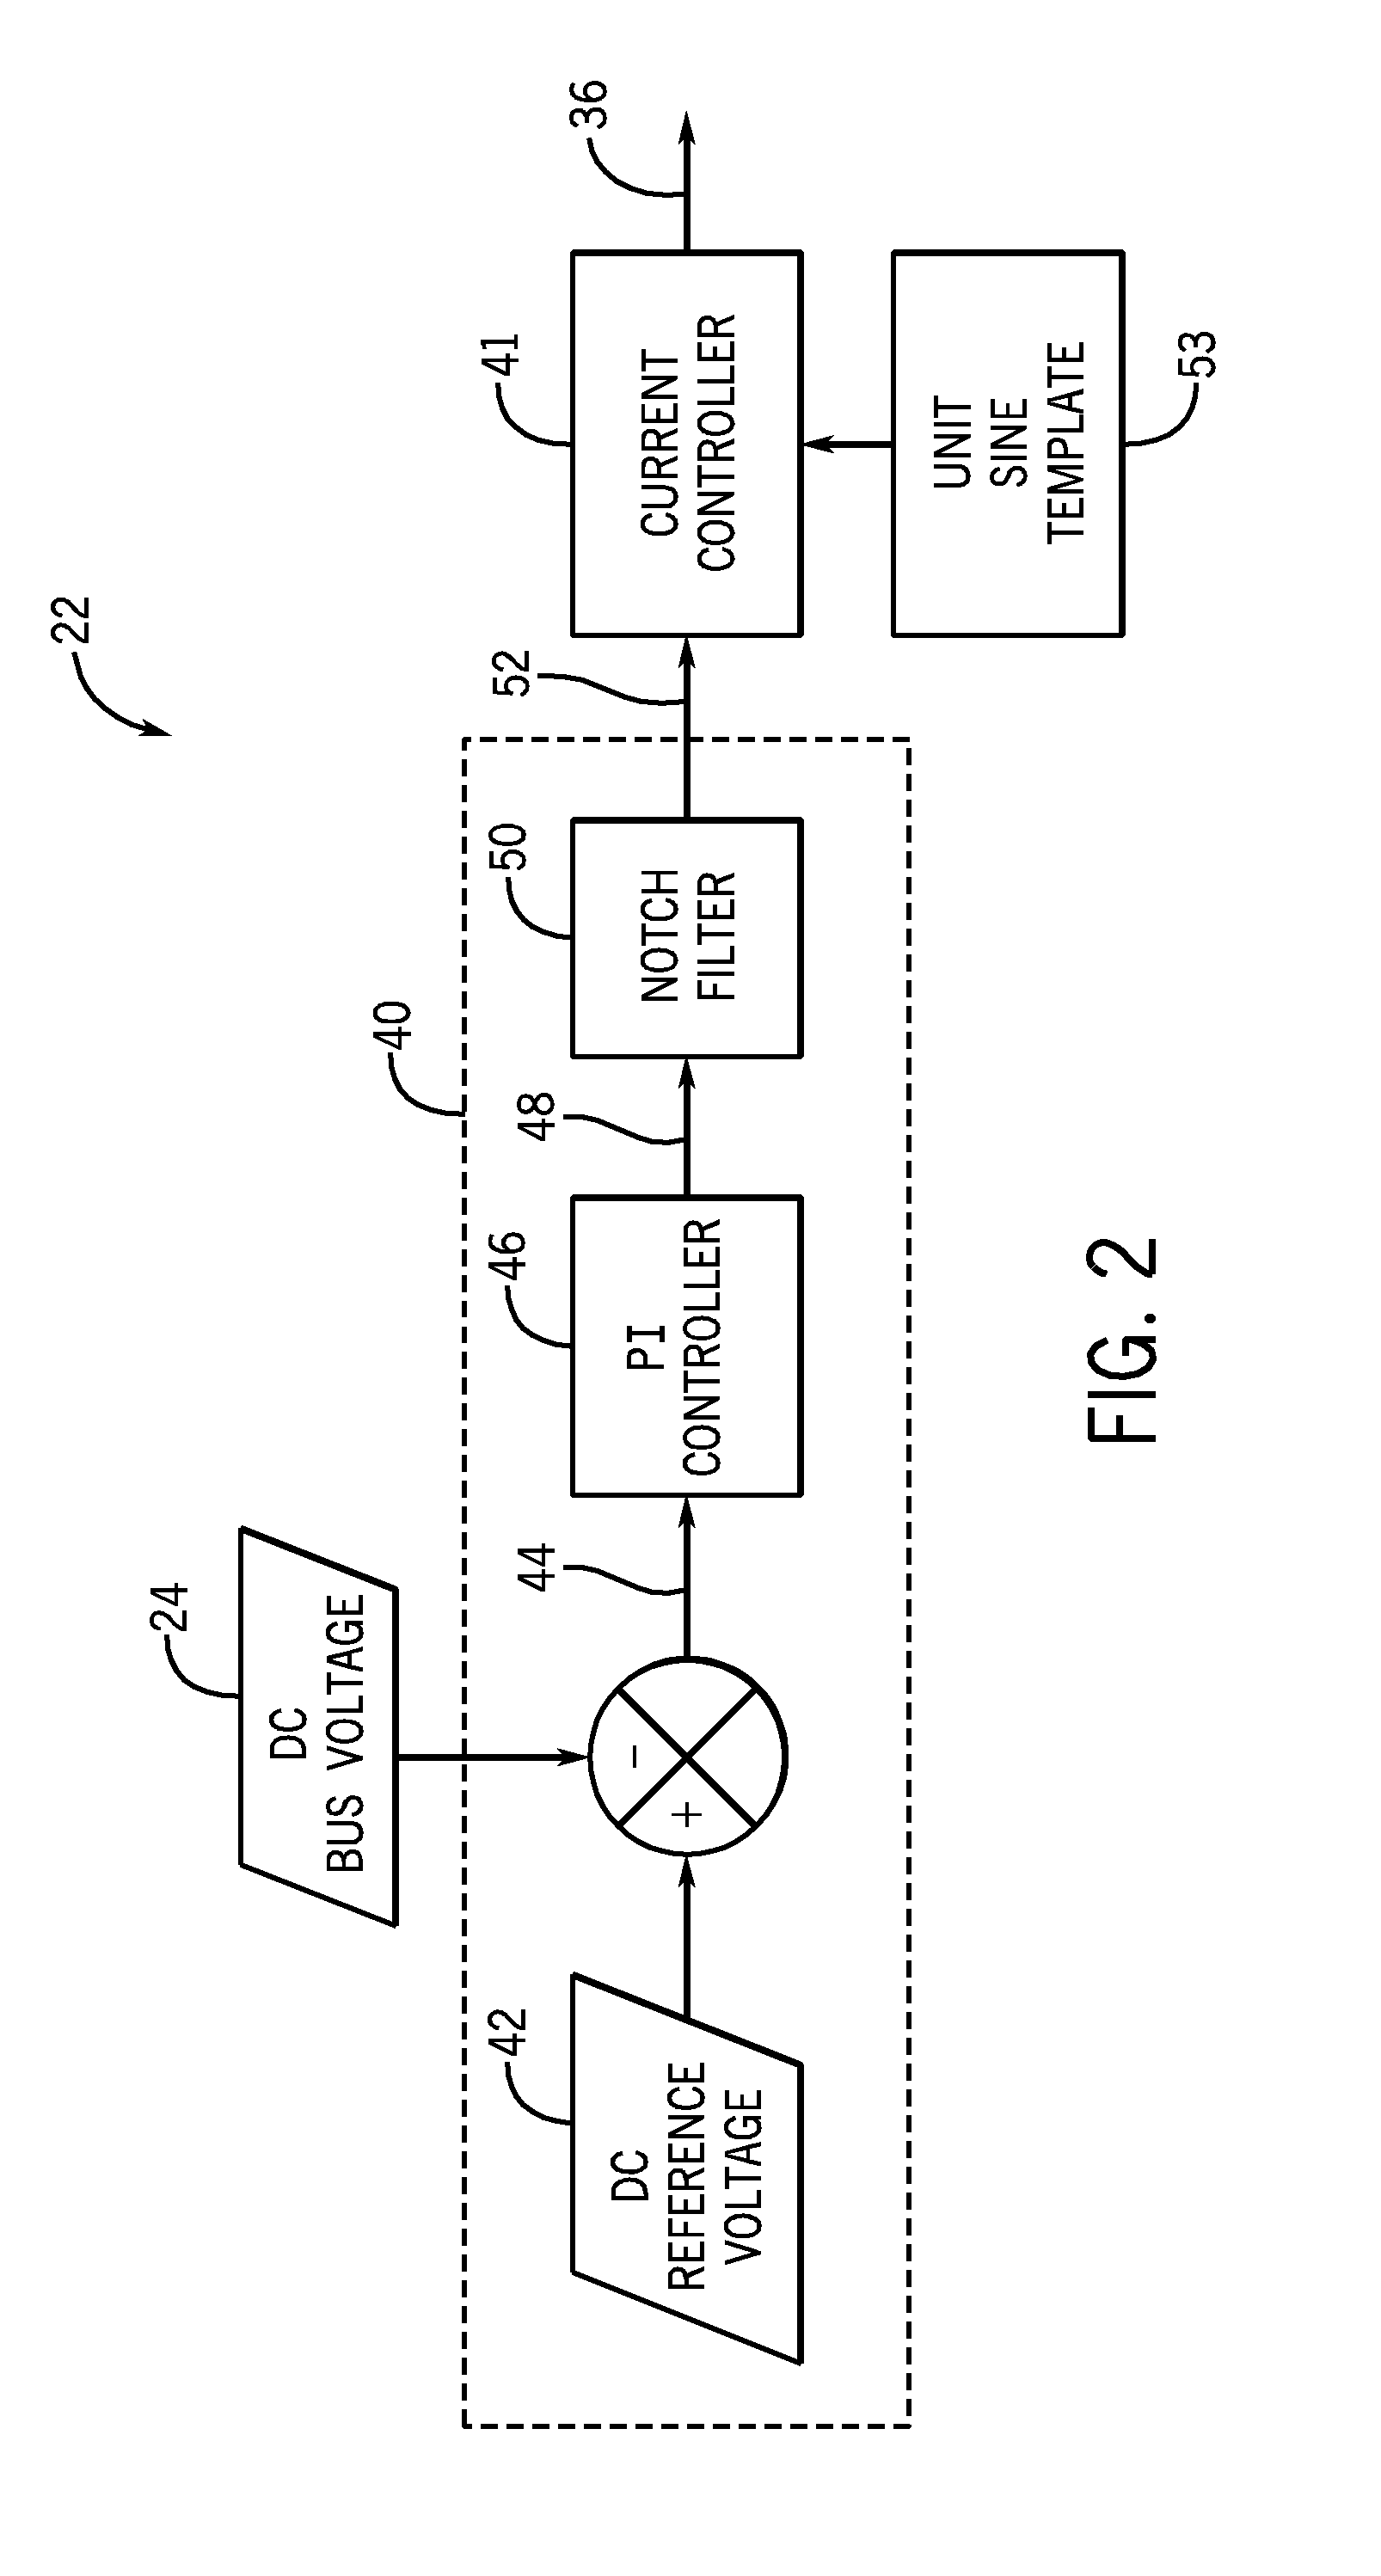 Systems and Methods for Balancing UPS Source Currents During Unbalanced Load Transient Conditions